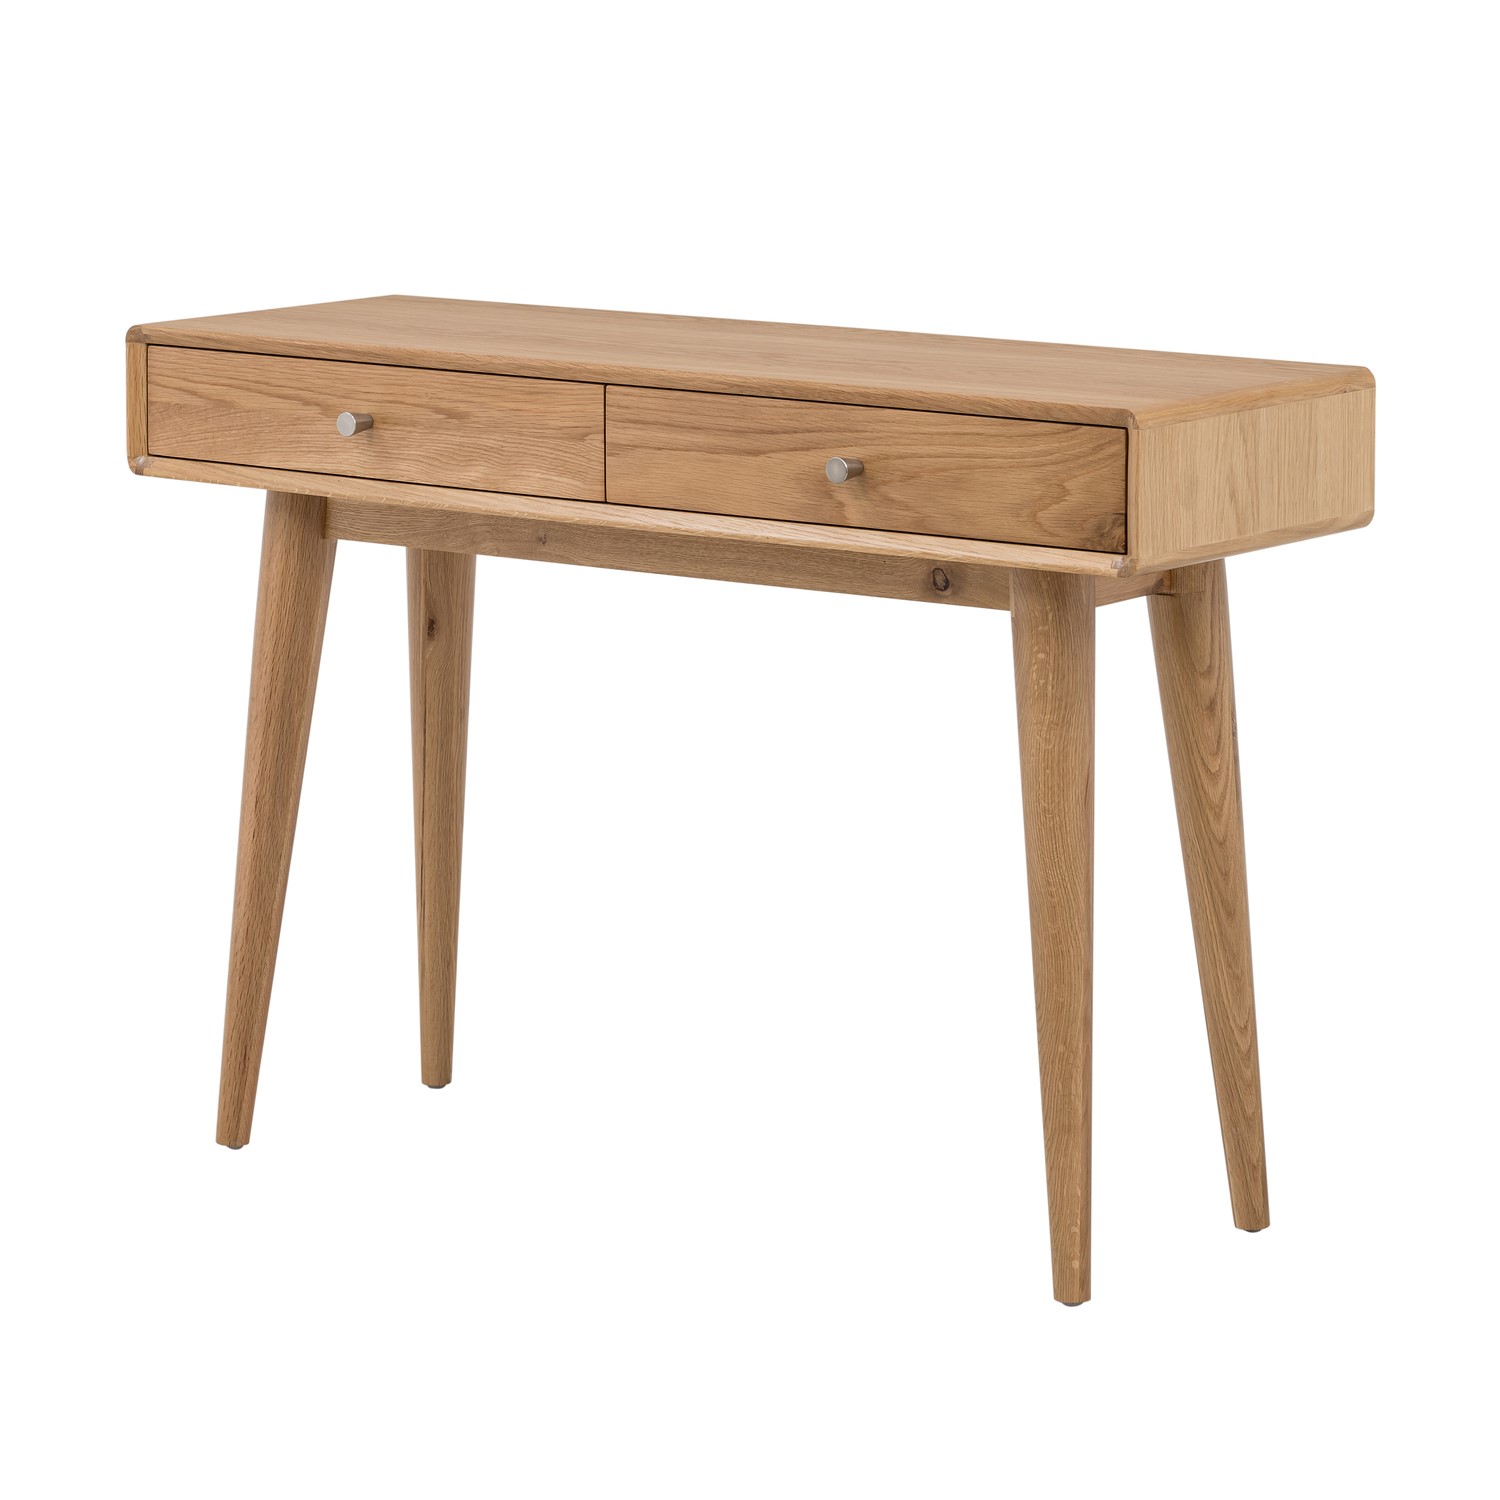 Read more about Oak console table with 2 drawers jenson